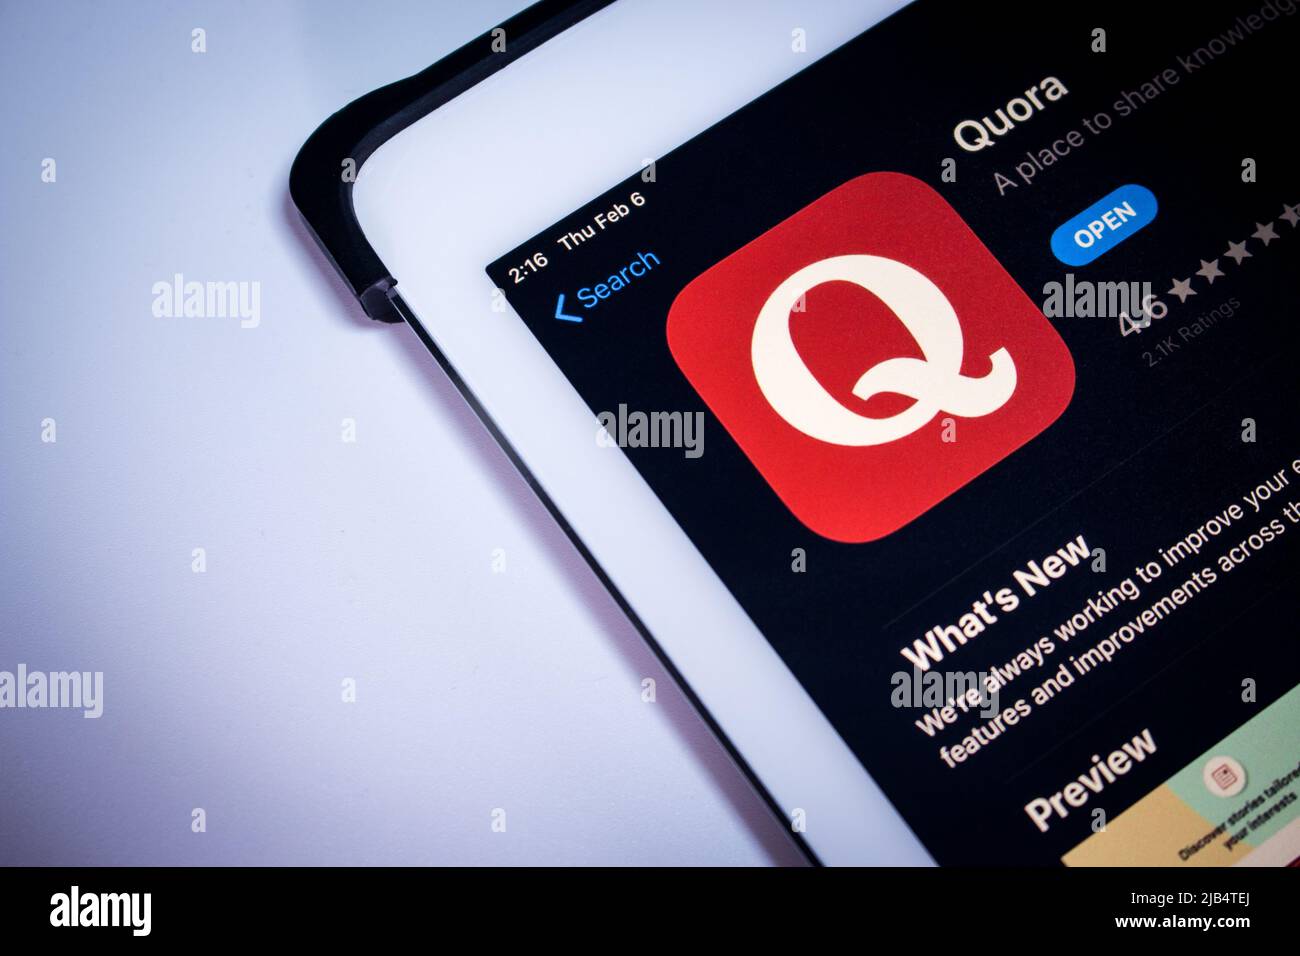 Quora app in App Store on an iPad. Quora is an US Q&A service where questions are asked, answered, and edited by users Stock Photo